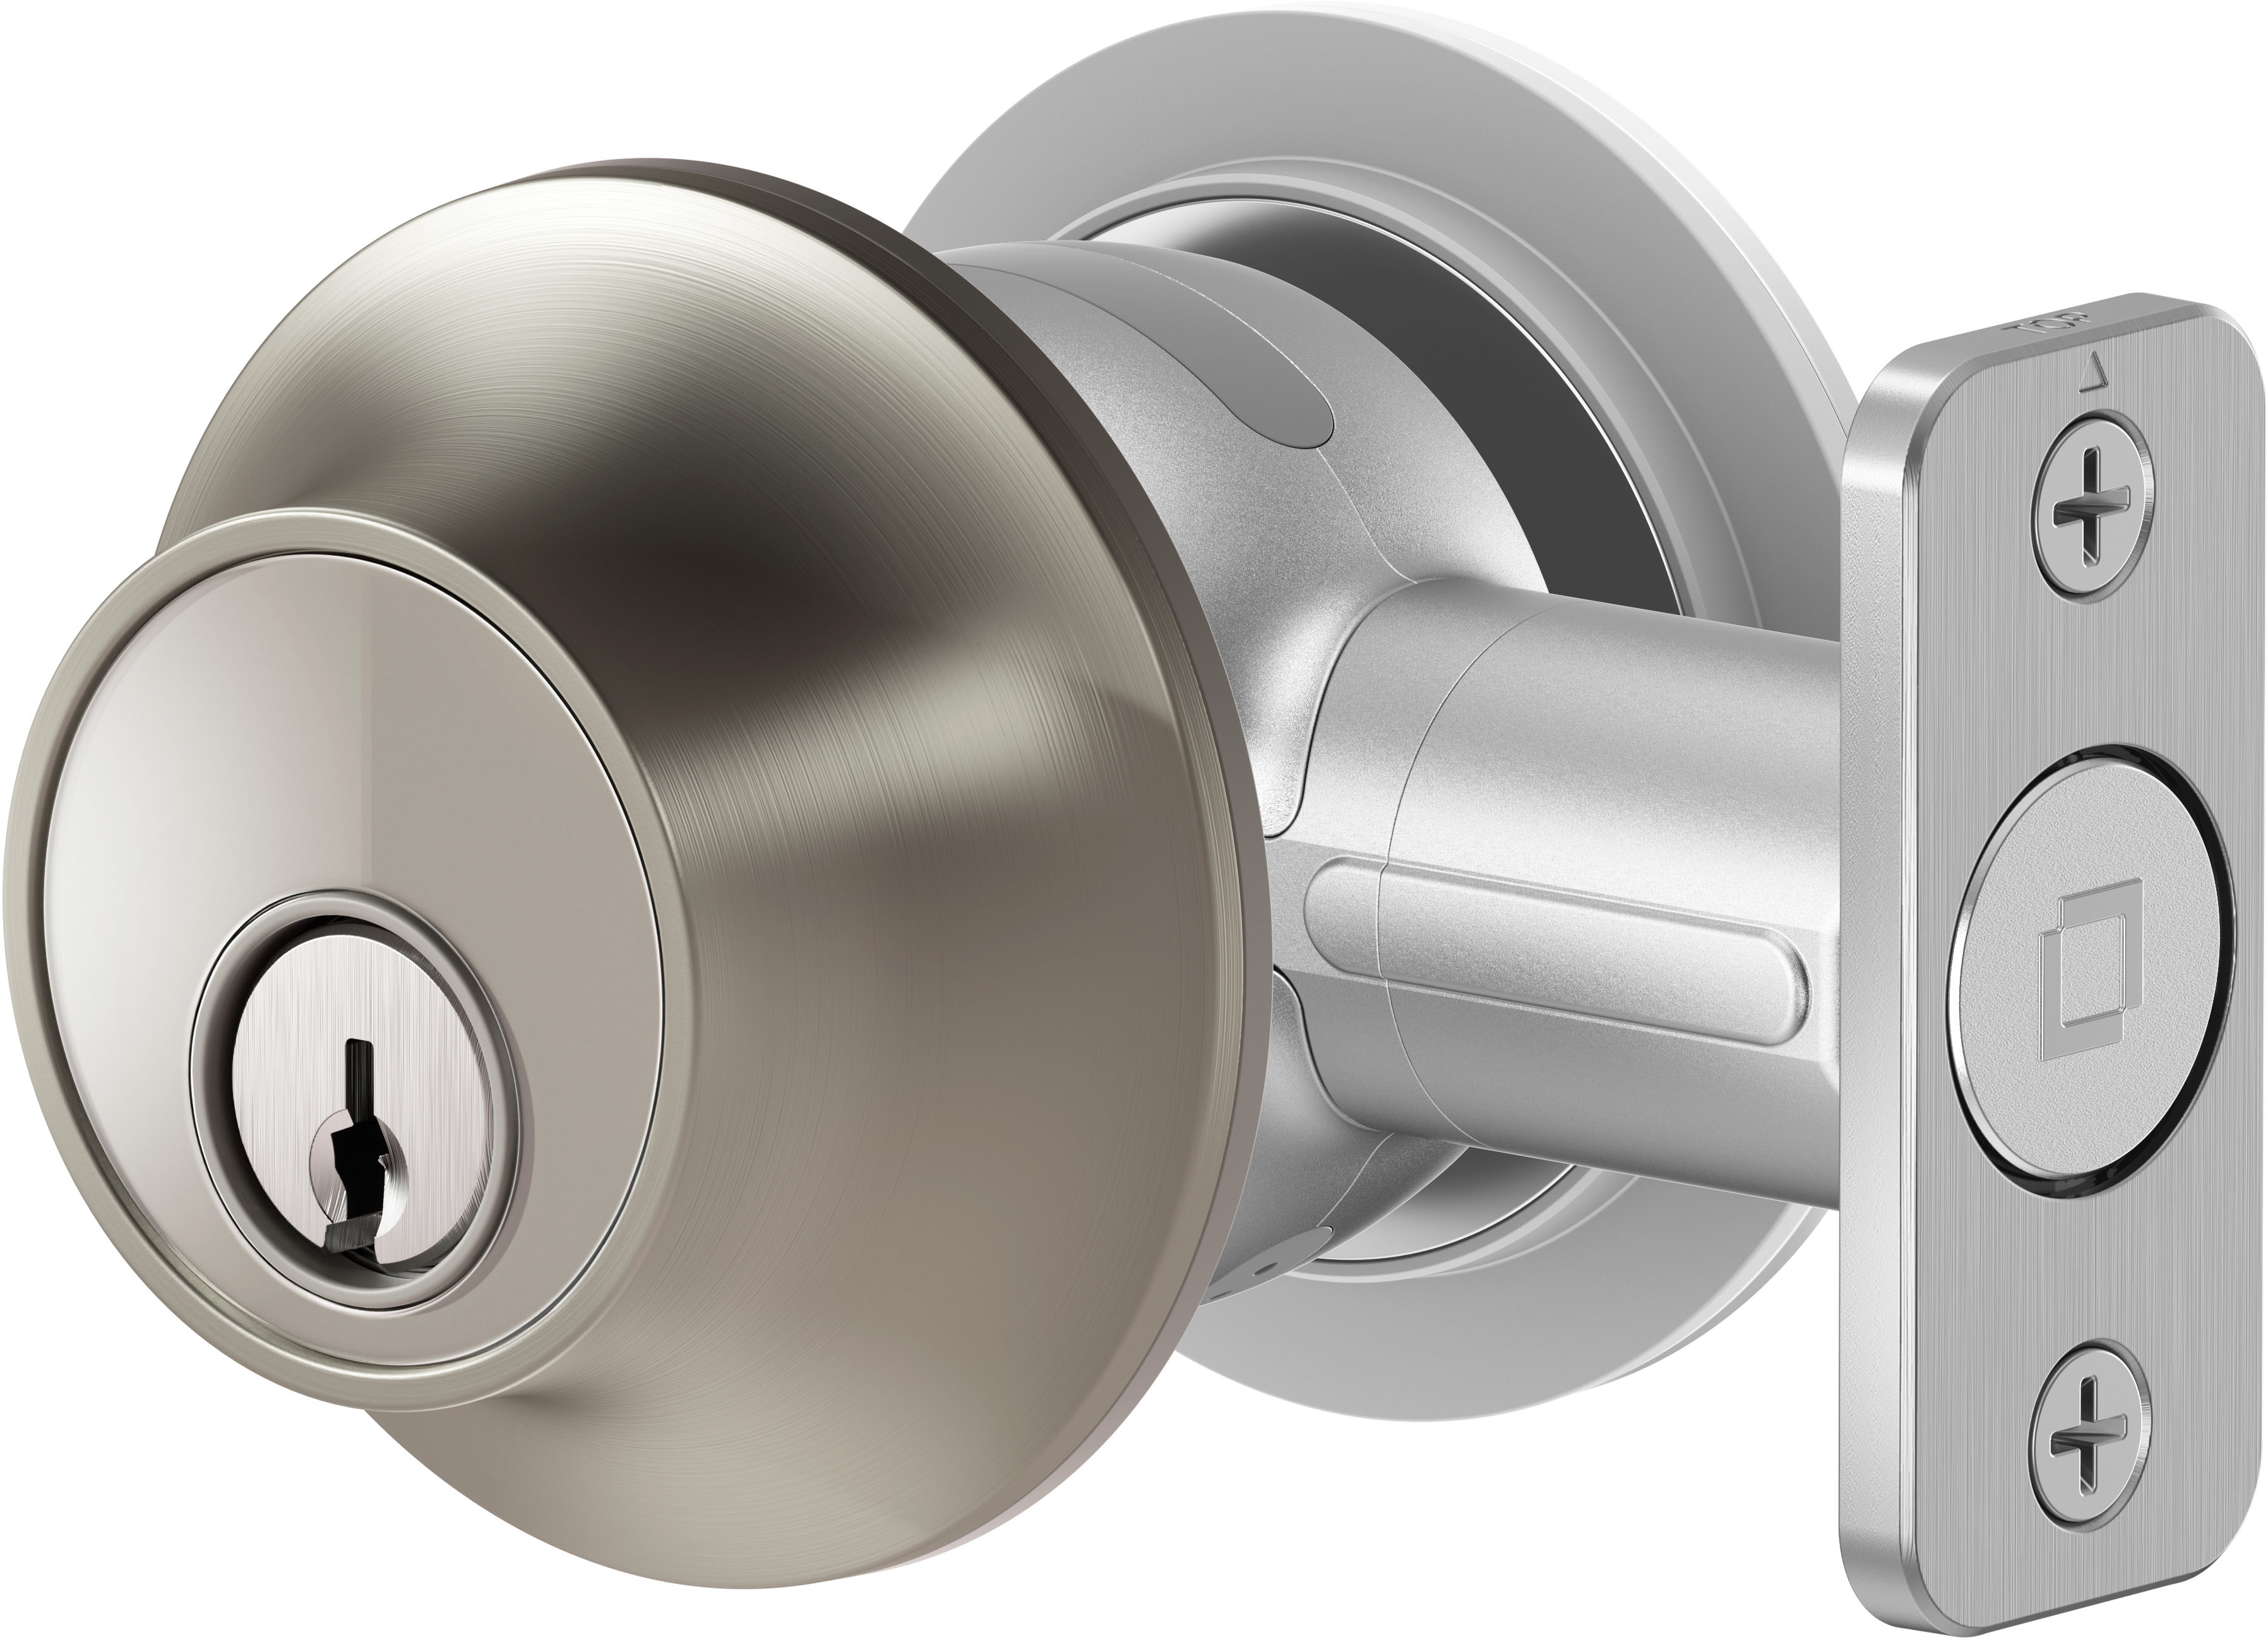 Level Touch Edition Smart Lock - Best Buy $229.00